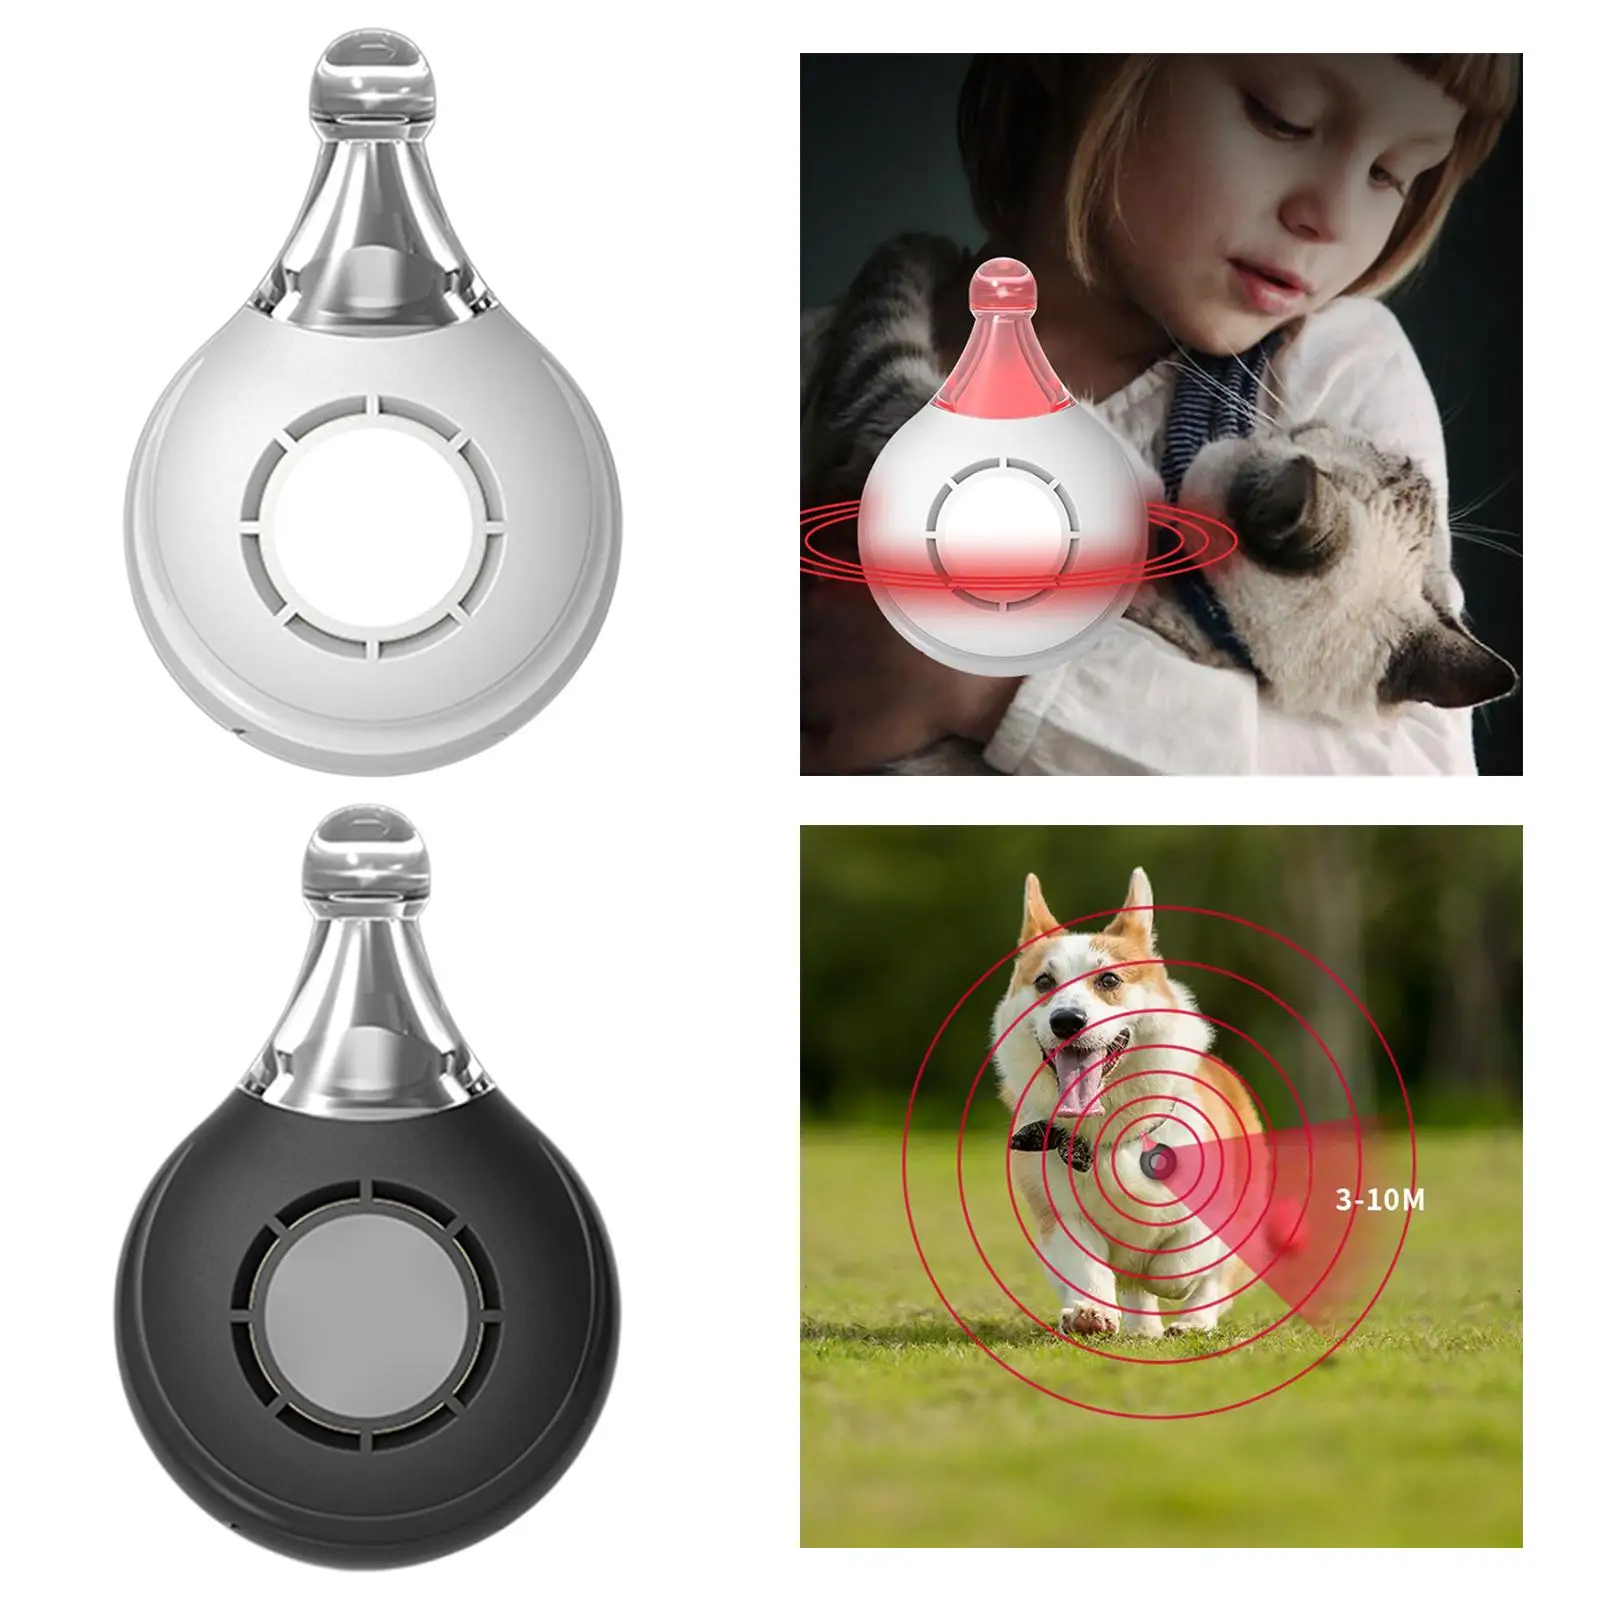 Ultrasonic Pest Repeller Compact Cat Insect Ticks Repellent Safe Pendant